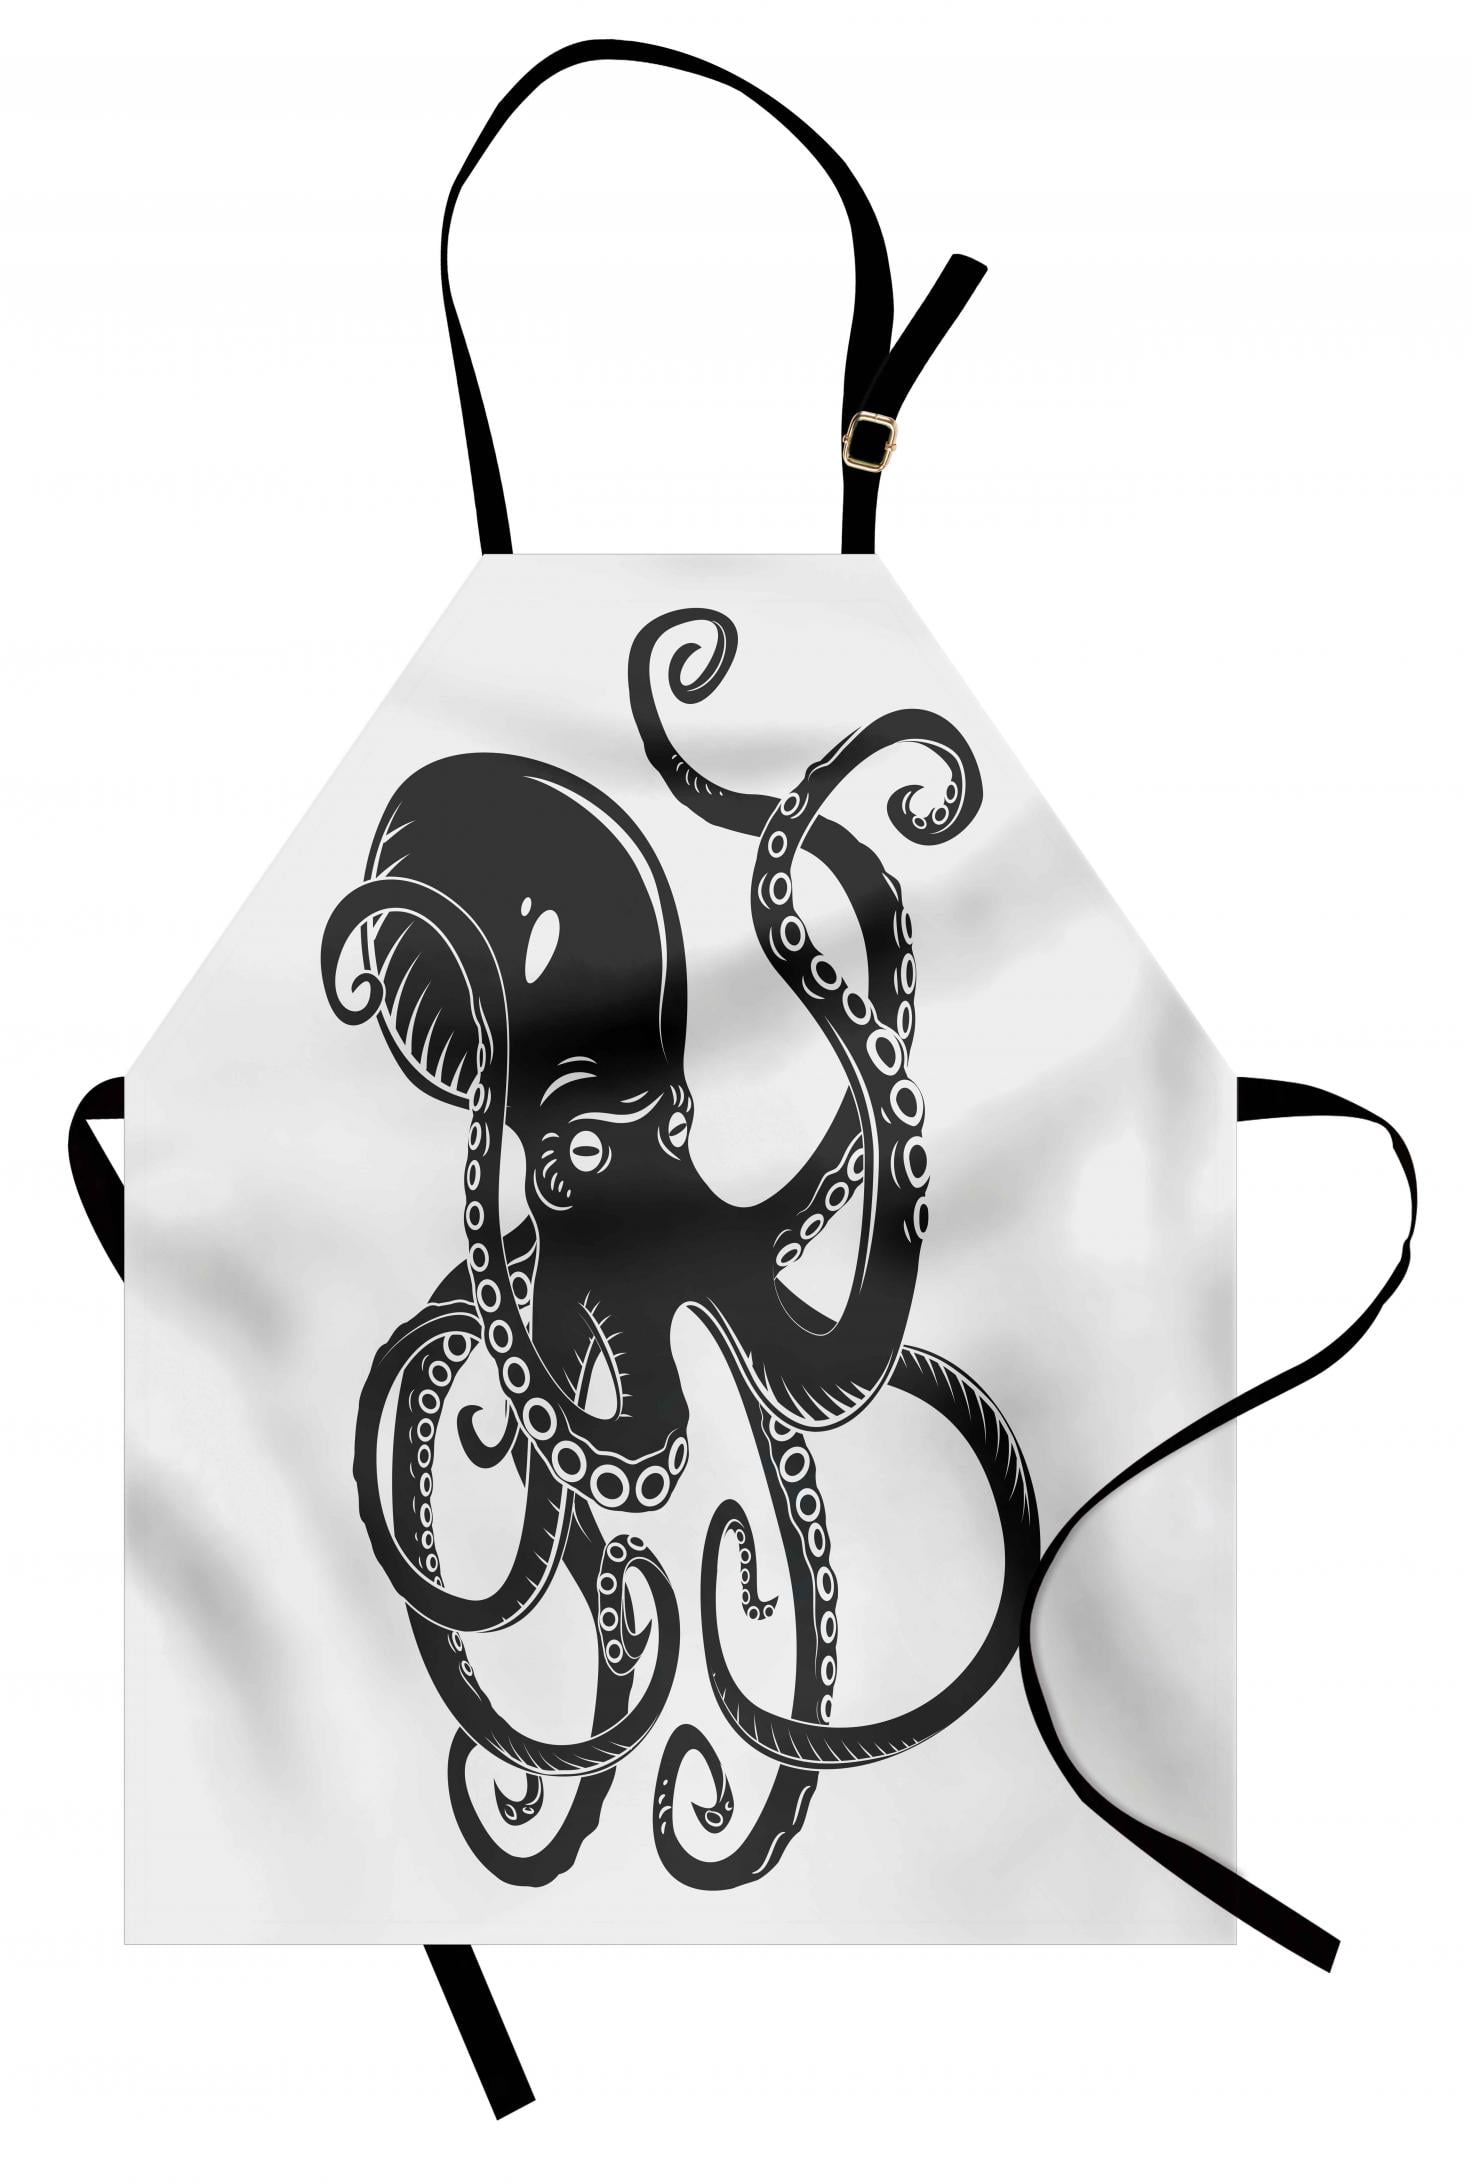 Octopus Apron Black Danger Cartoon Octopus Characters With Curling Tentacles Swimming Underwater Art Unisex Kitchen Bib Apron With Adjustable Neck For Cooking Baking Gardening Black By Ambesonne Walmart Com Walmart Com,Data Entry At Home Jobs Australia